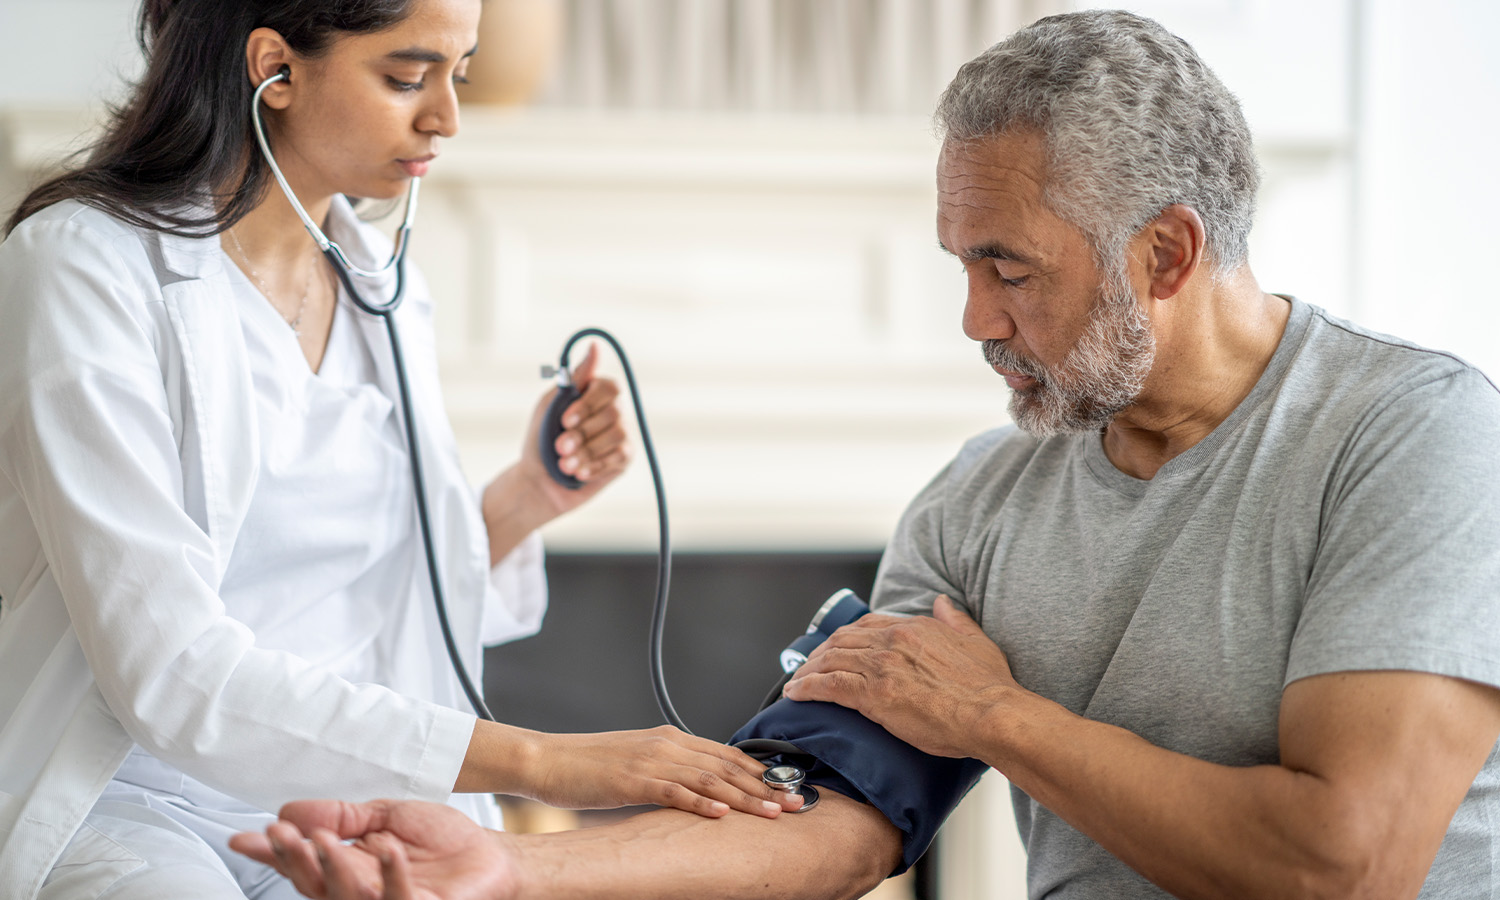 aetf website news articles featured 750x450 x2 blood pressure